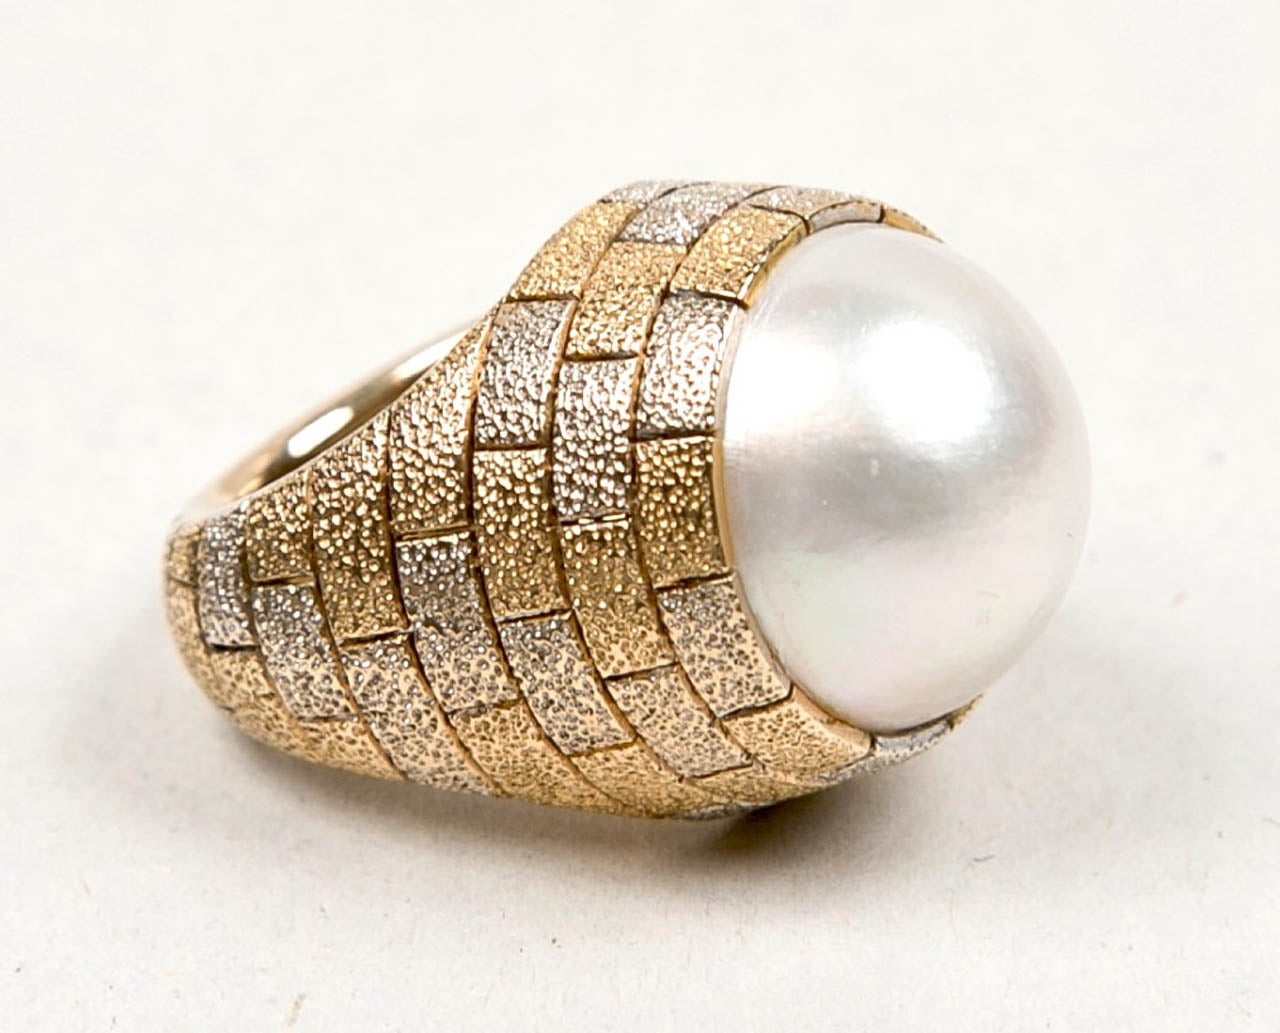 1960's Moby Pearl Ring Set Two Colored Gold. Very unusual and fine craftsmanship

size 6.5